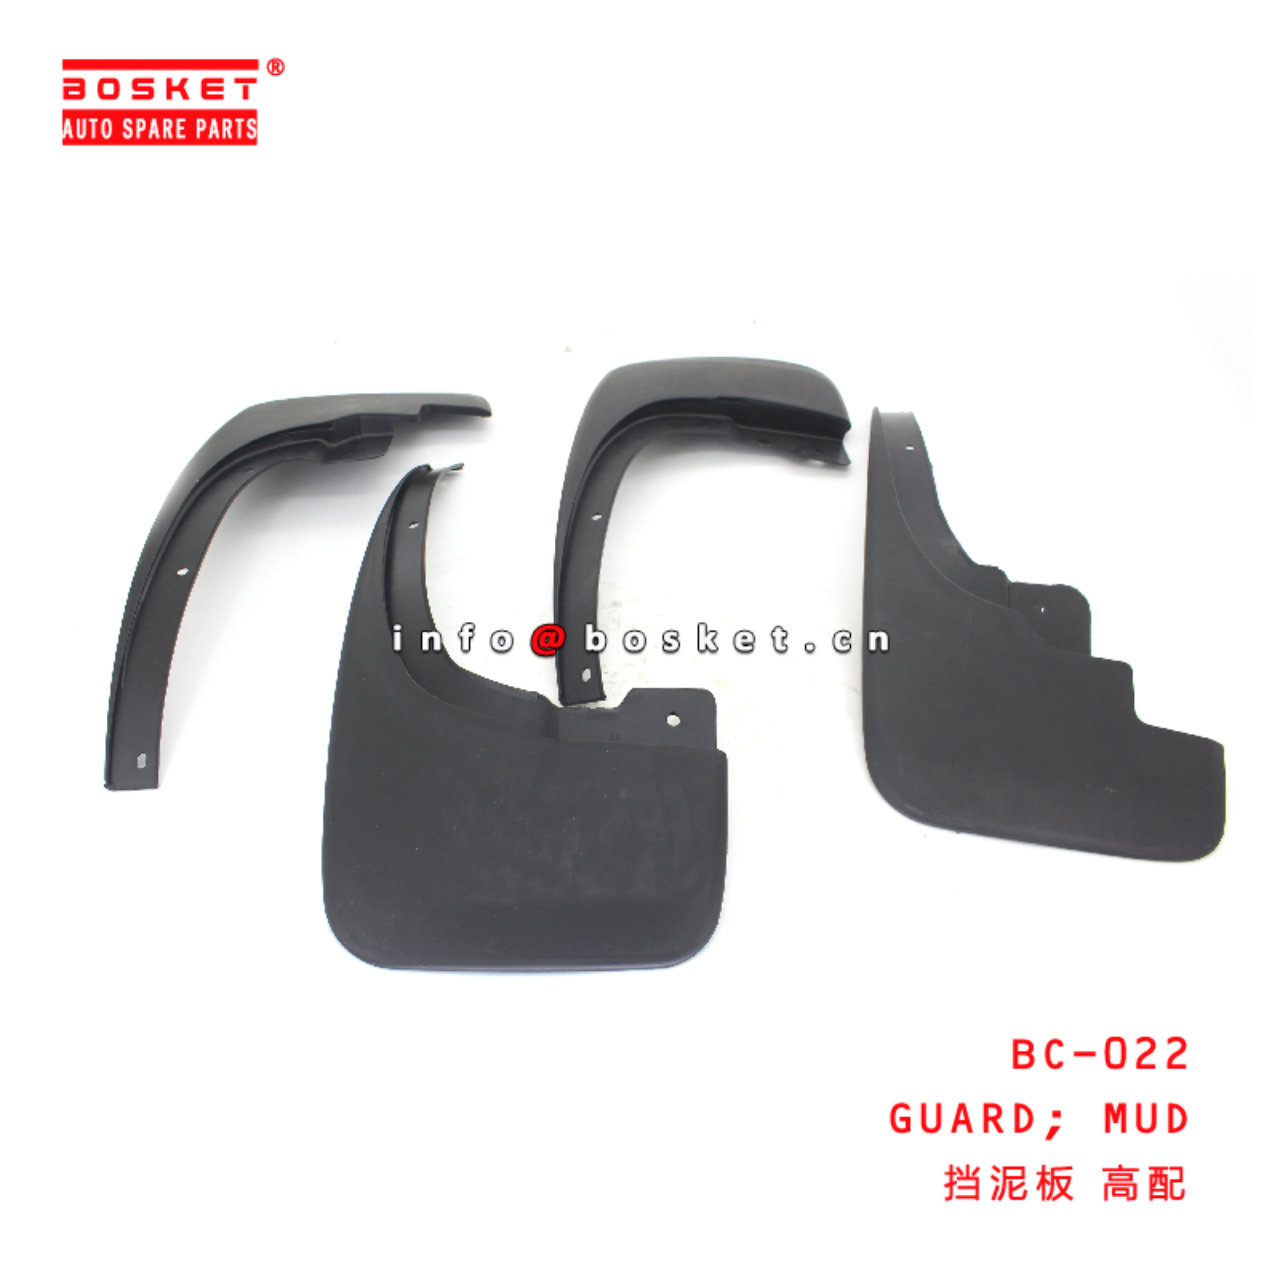 BC-022 Mud Guard suitable for ISUZU DMAX2021  BC-022